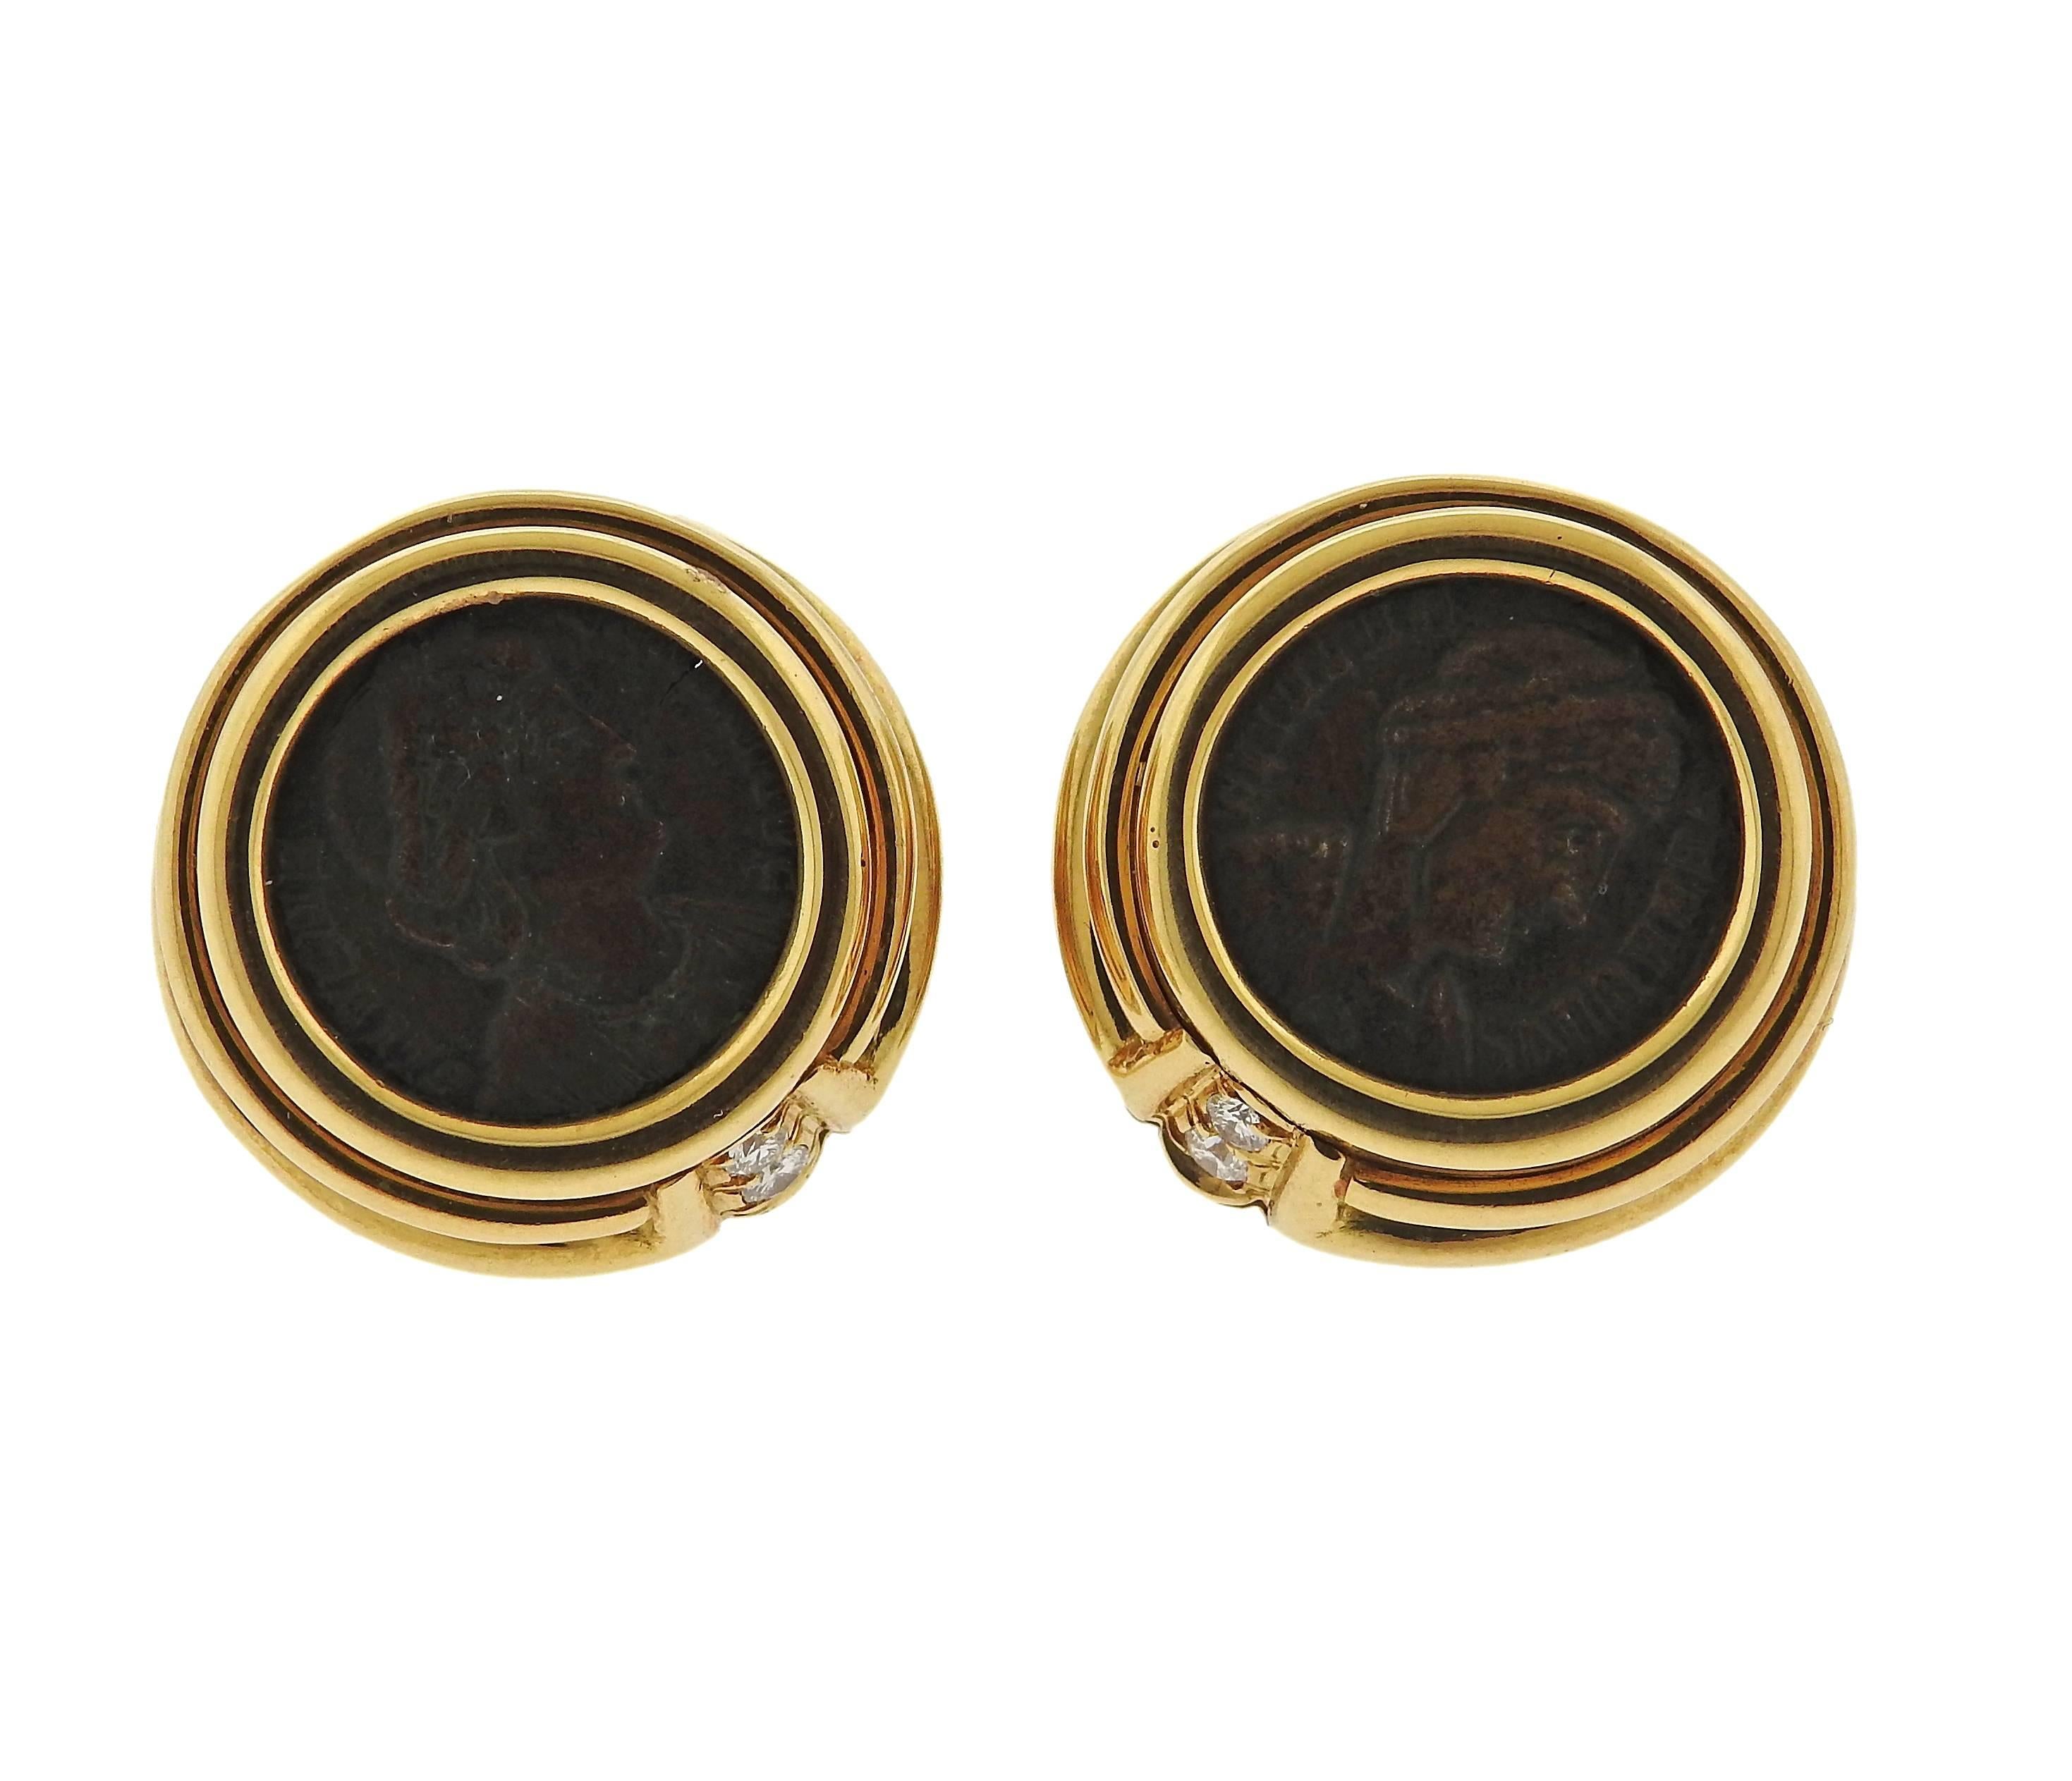 A pair of 18k gold ancient coin earrings featuring approximately 0.10ctw of G/VS diamonds. Earrings measure 20mm in diameter. Marked Roma-Helena, 4 328 D.C., Bvlgari, 750. Weight is 27.8 grams. 